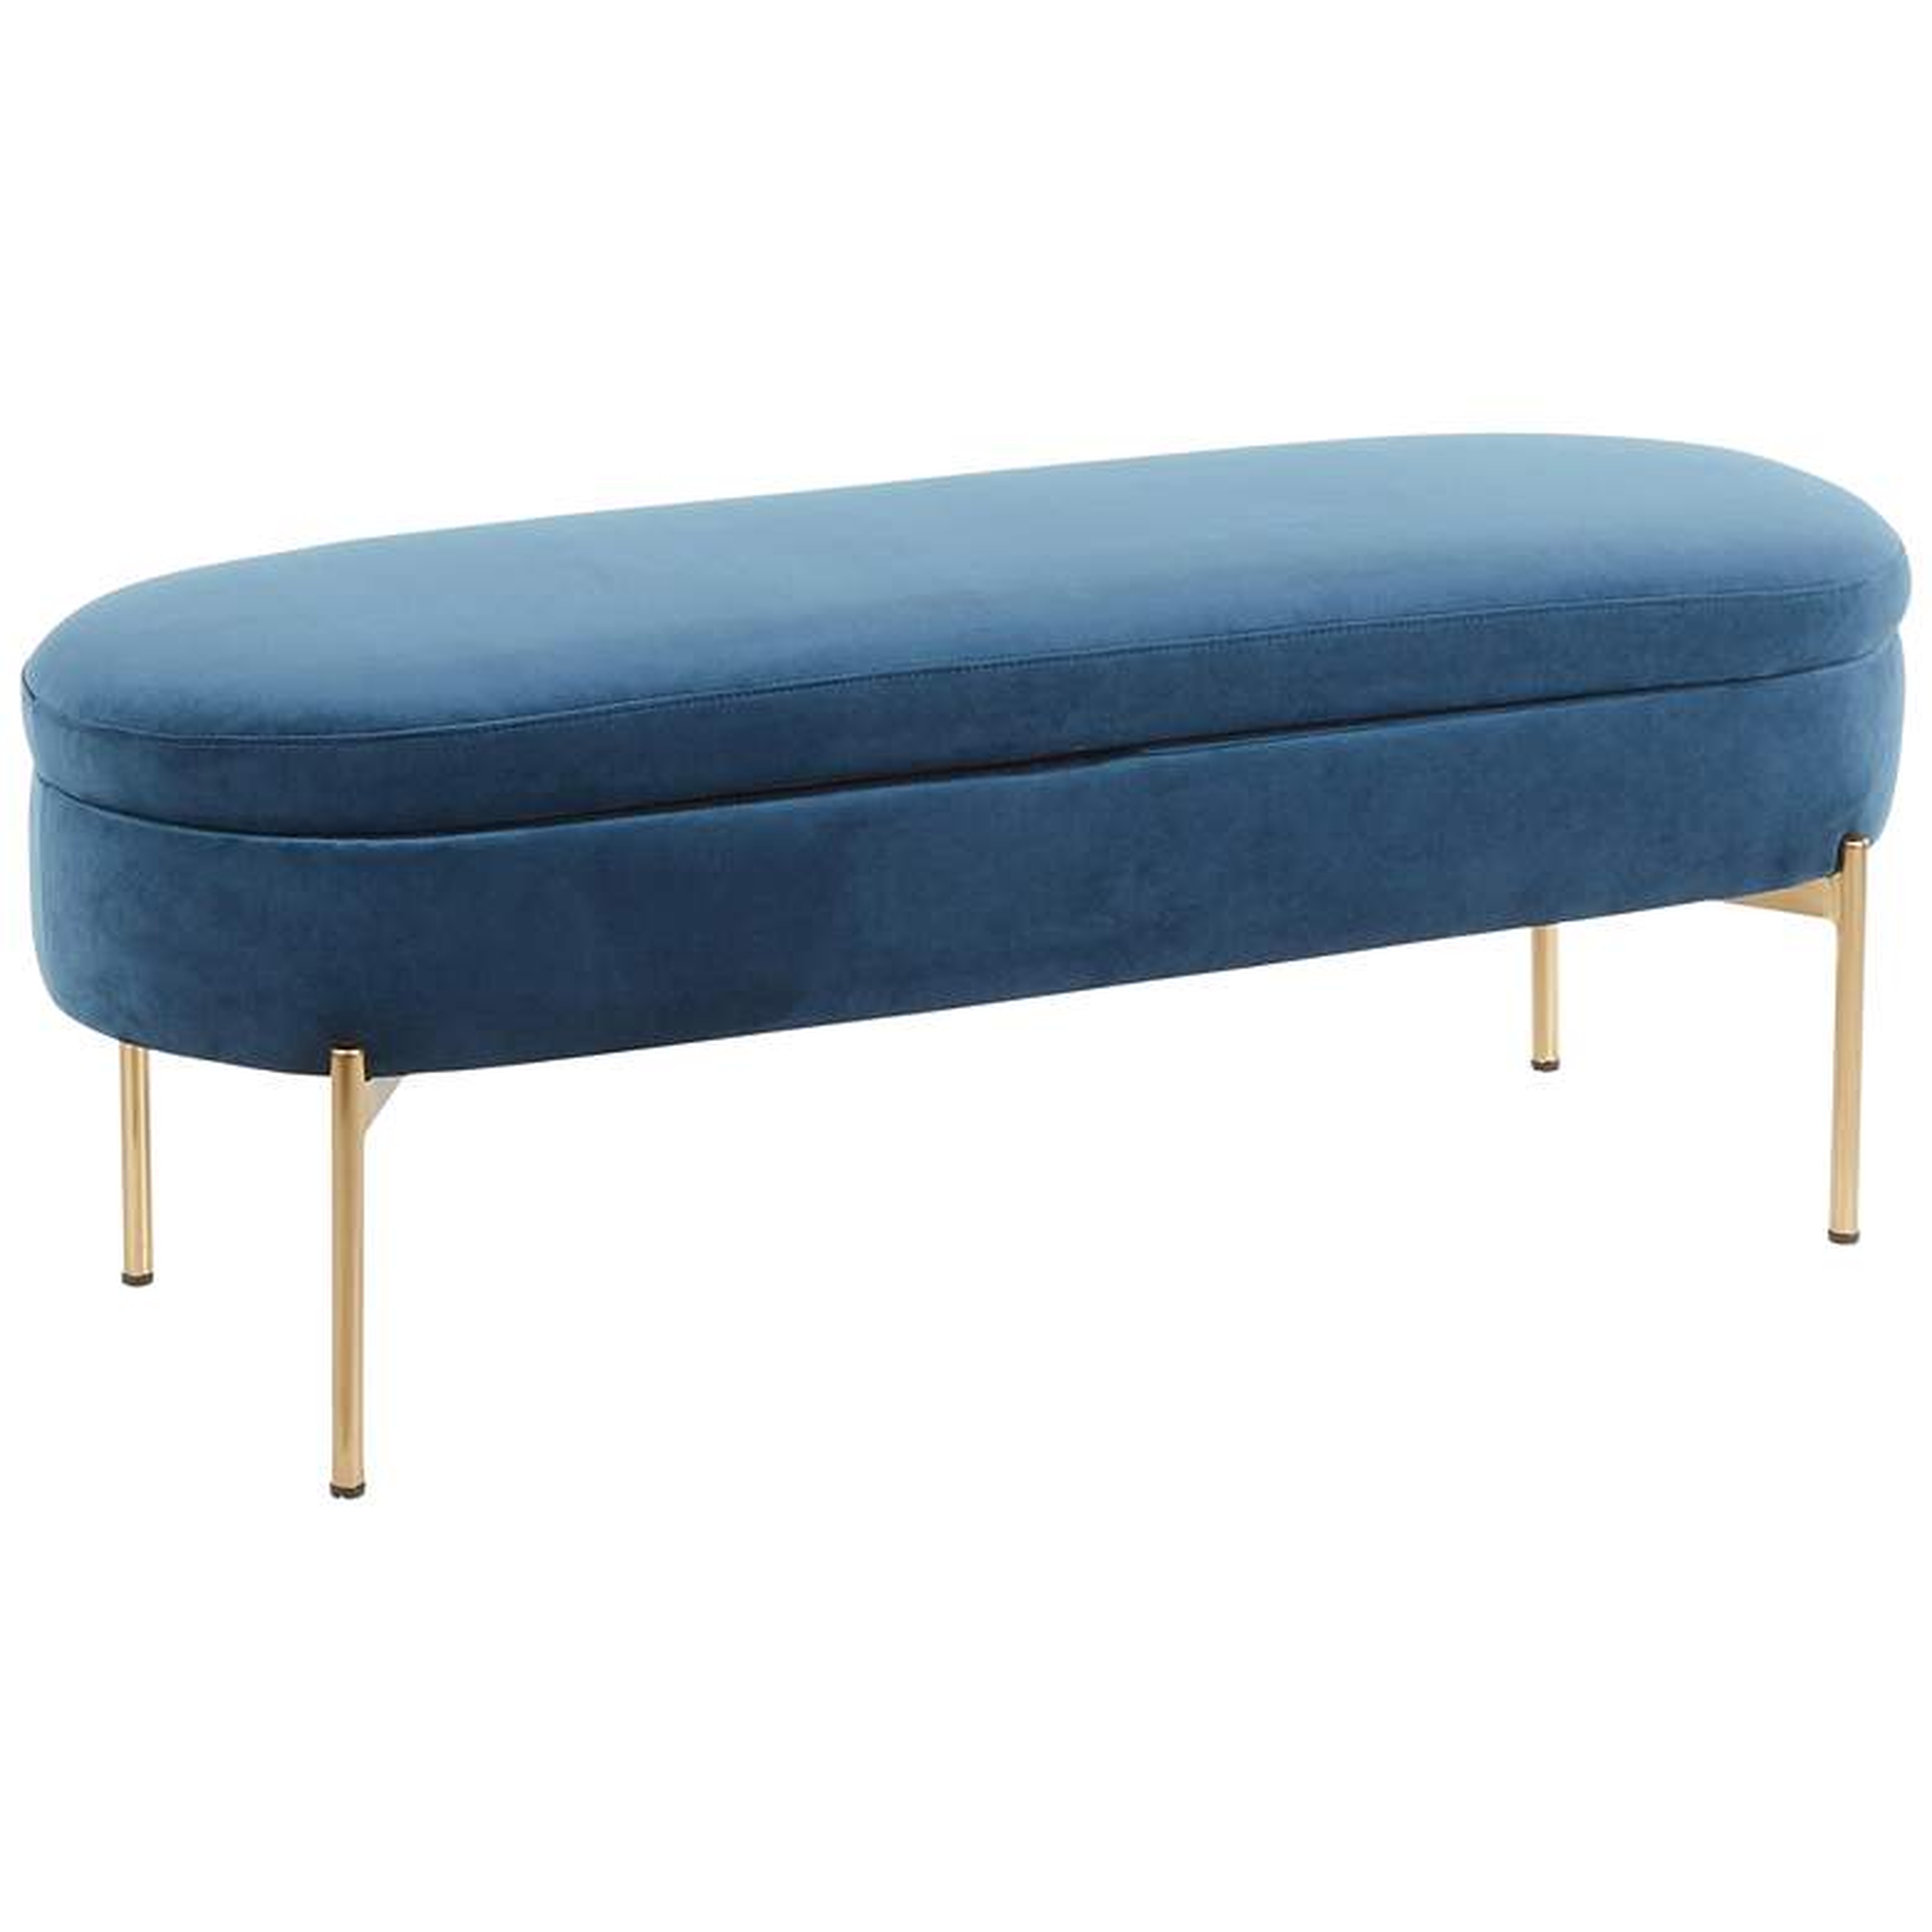 Chloe Blue Velvet and Gold Metal Storage Bench - Style # 94V83 - Lamps Plus